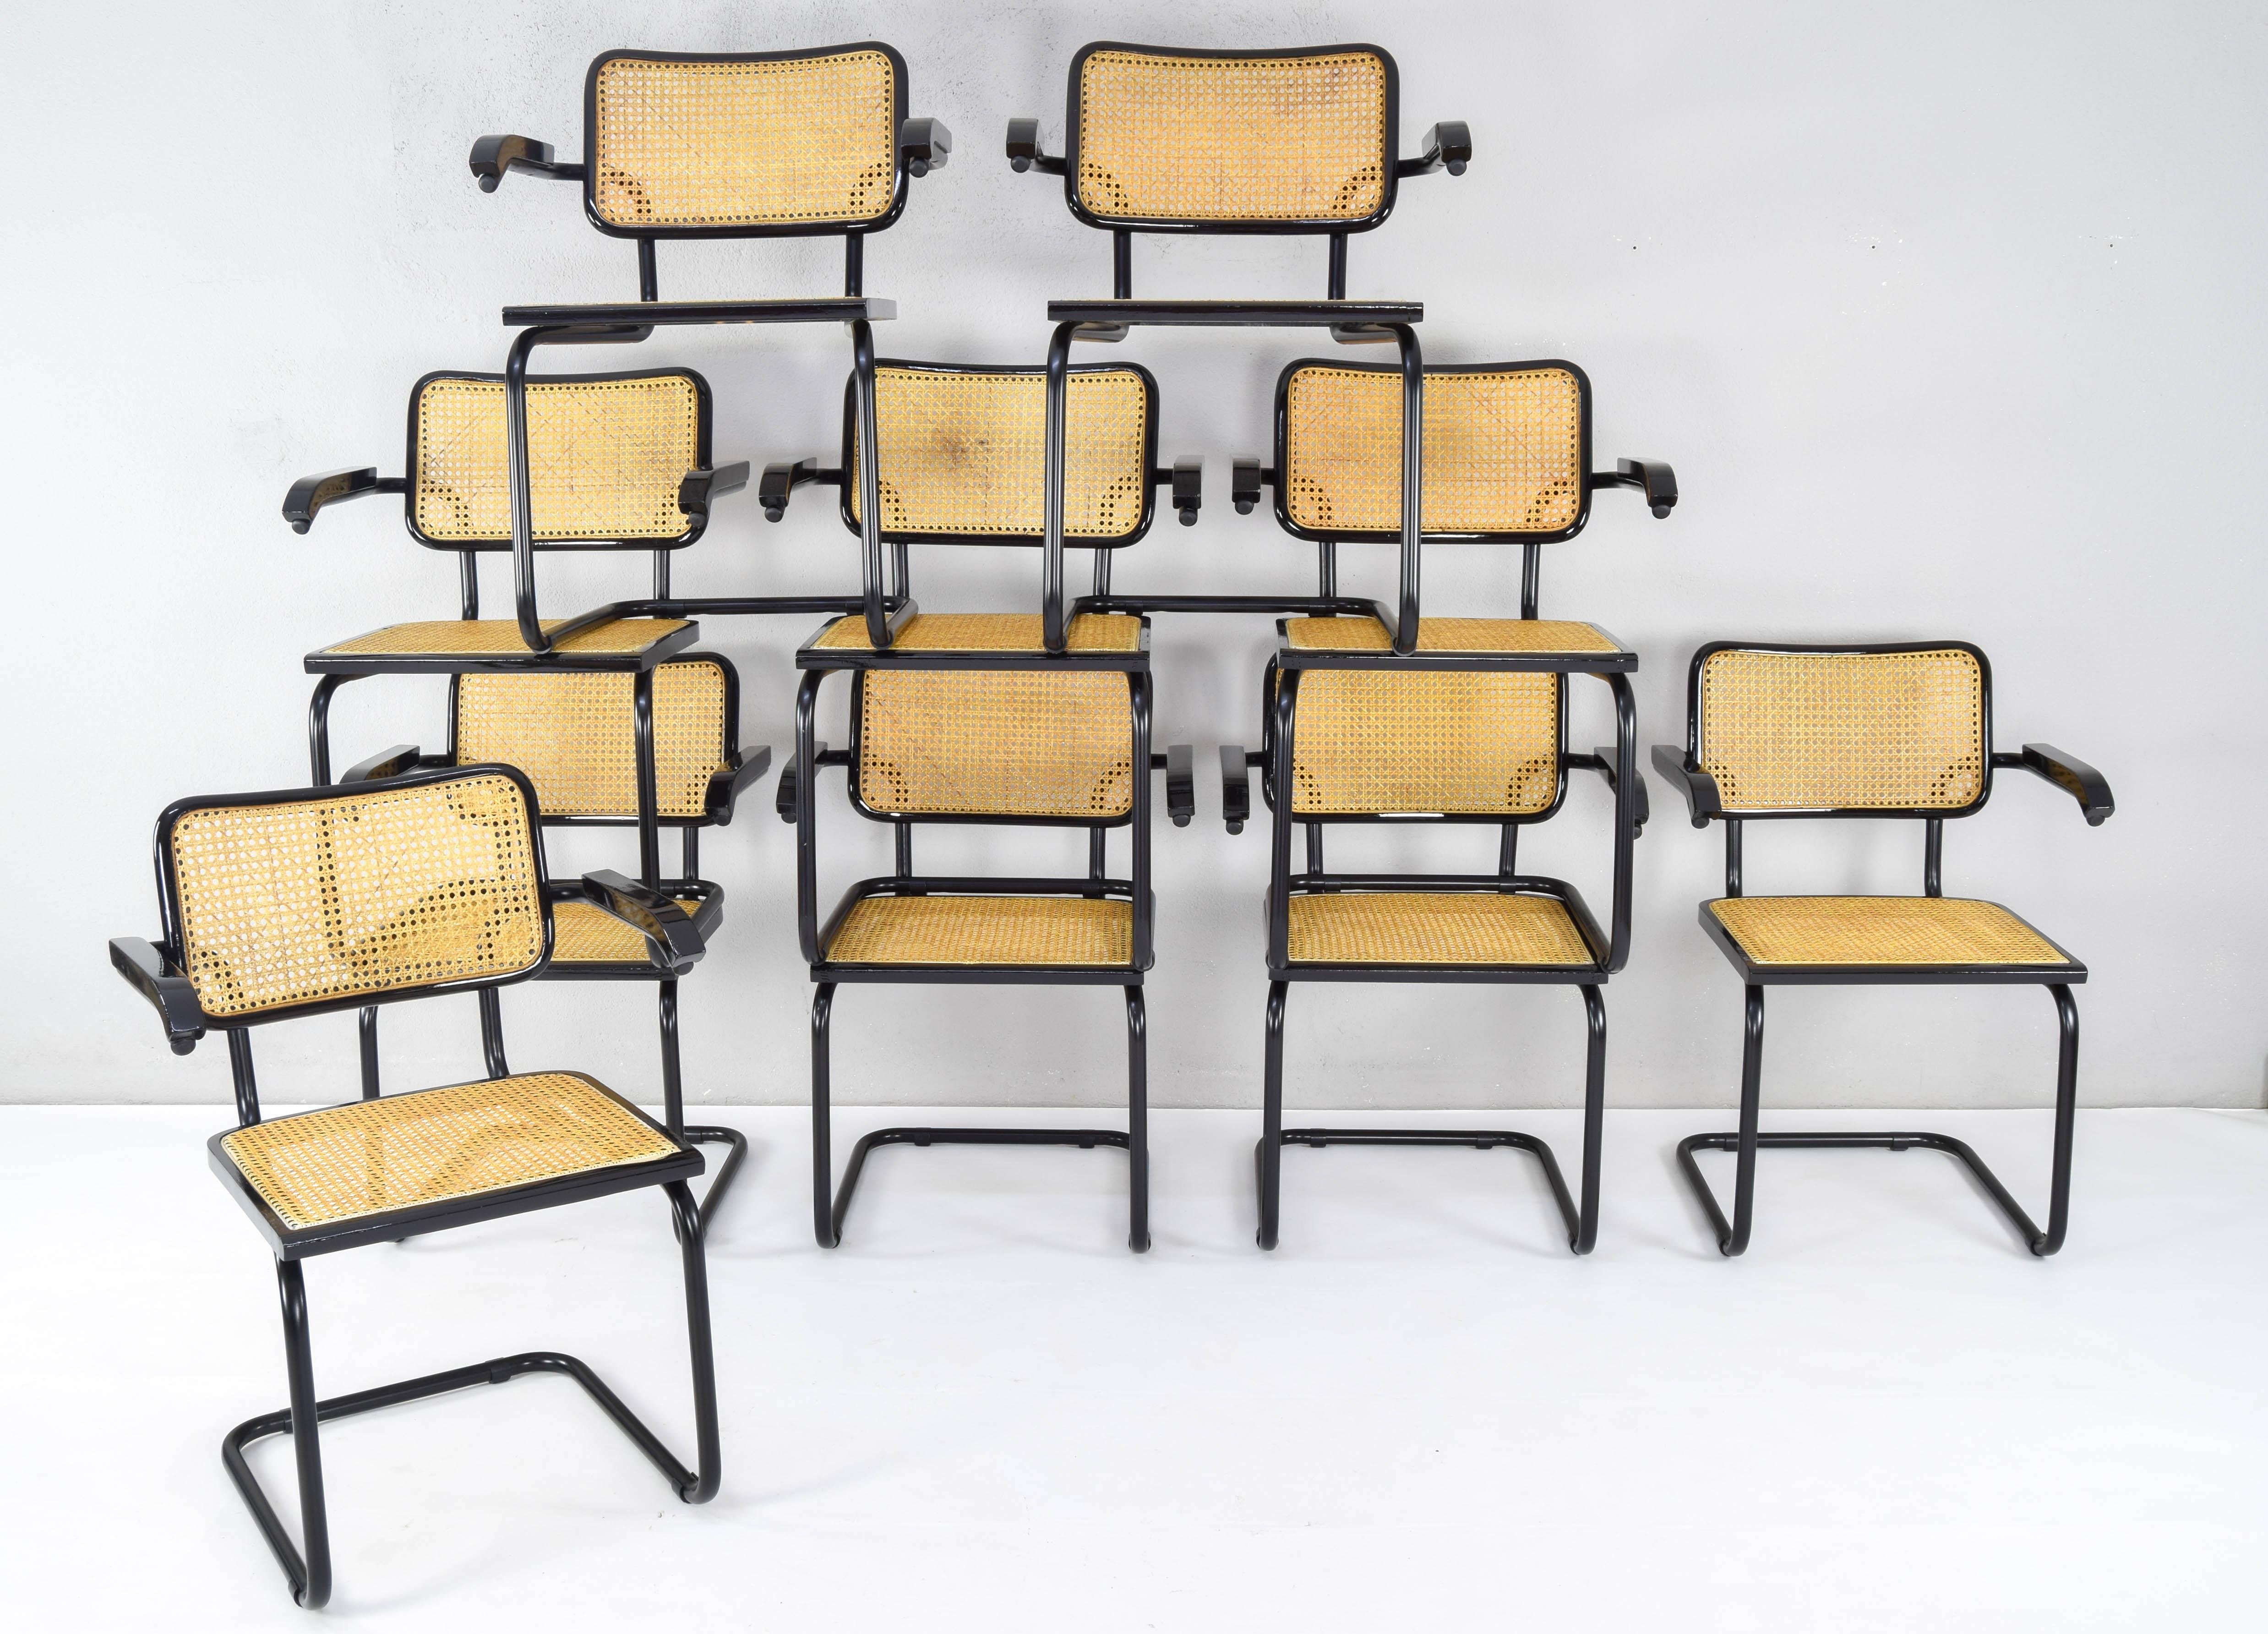 Cesca chairs, model B64.
Sale in pairs.
Ten units available (five pairs).

Tubular structure in black lacquered steel in excellent condition. Black lacquered beech wood frames and natural Viennese grille. All new seat grilles have been